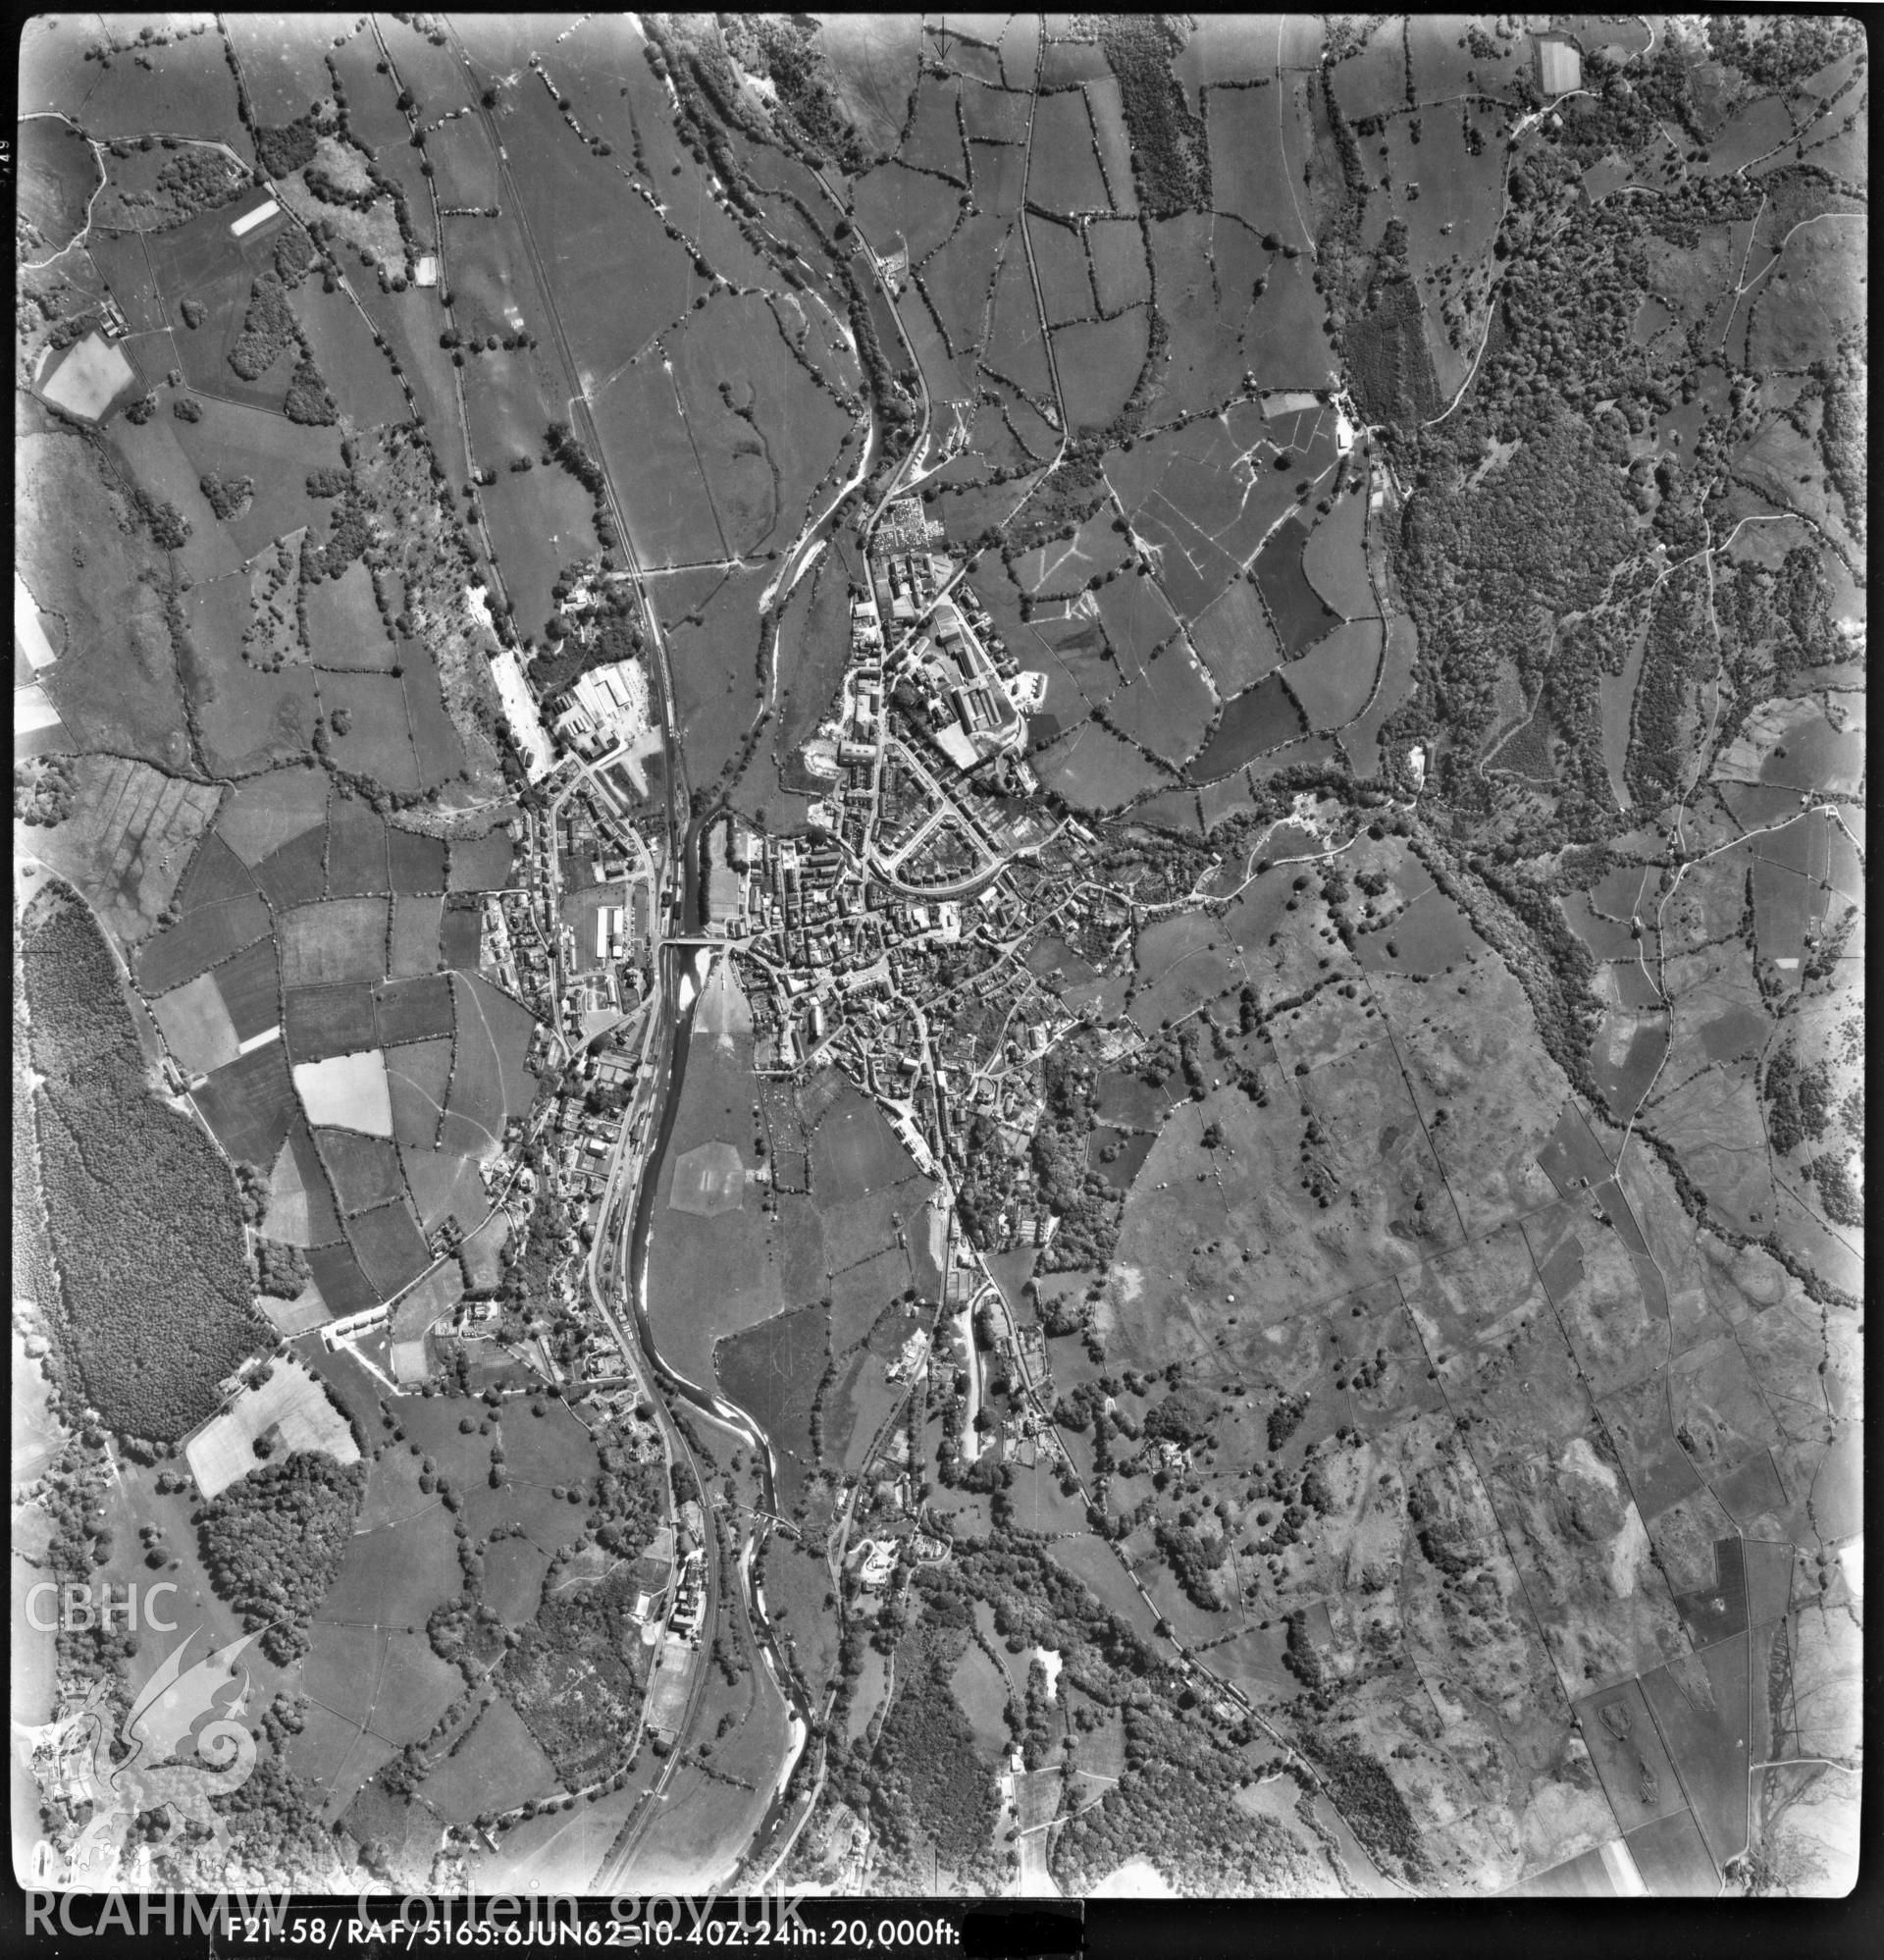 Black and white vertical aerial photograph, taken in 1962 by the RAF, showing the  Dolgellau area at a height of 20,000'